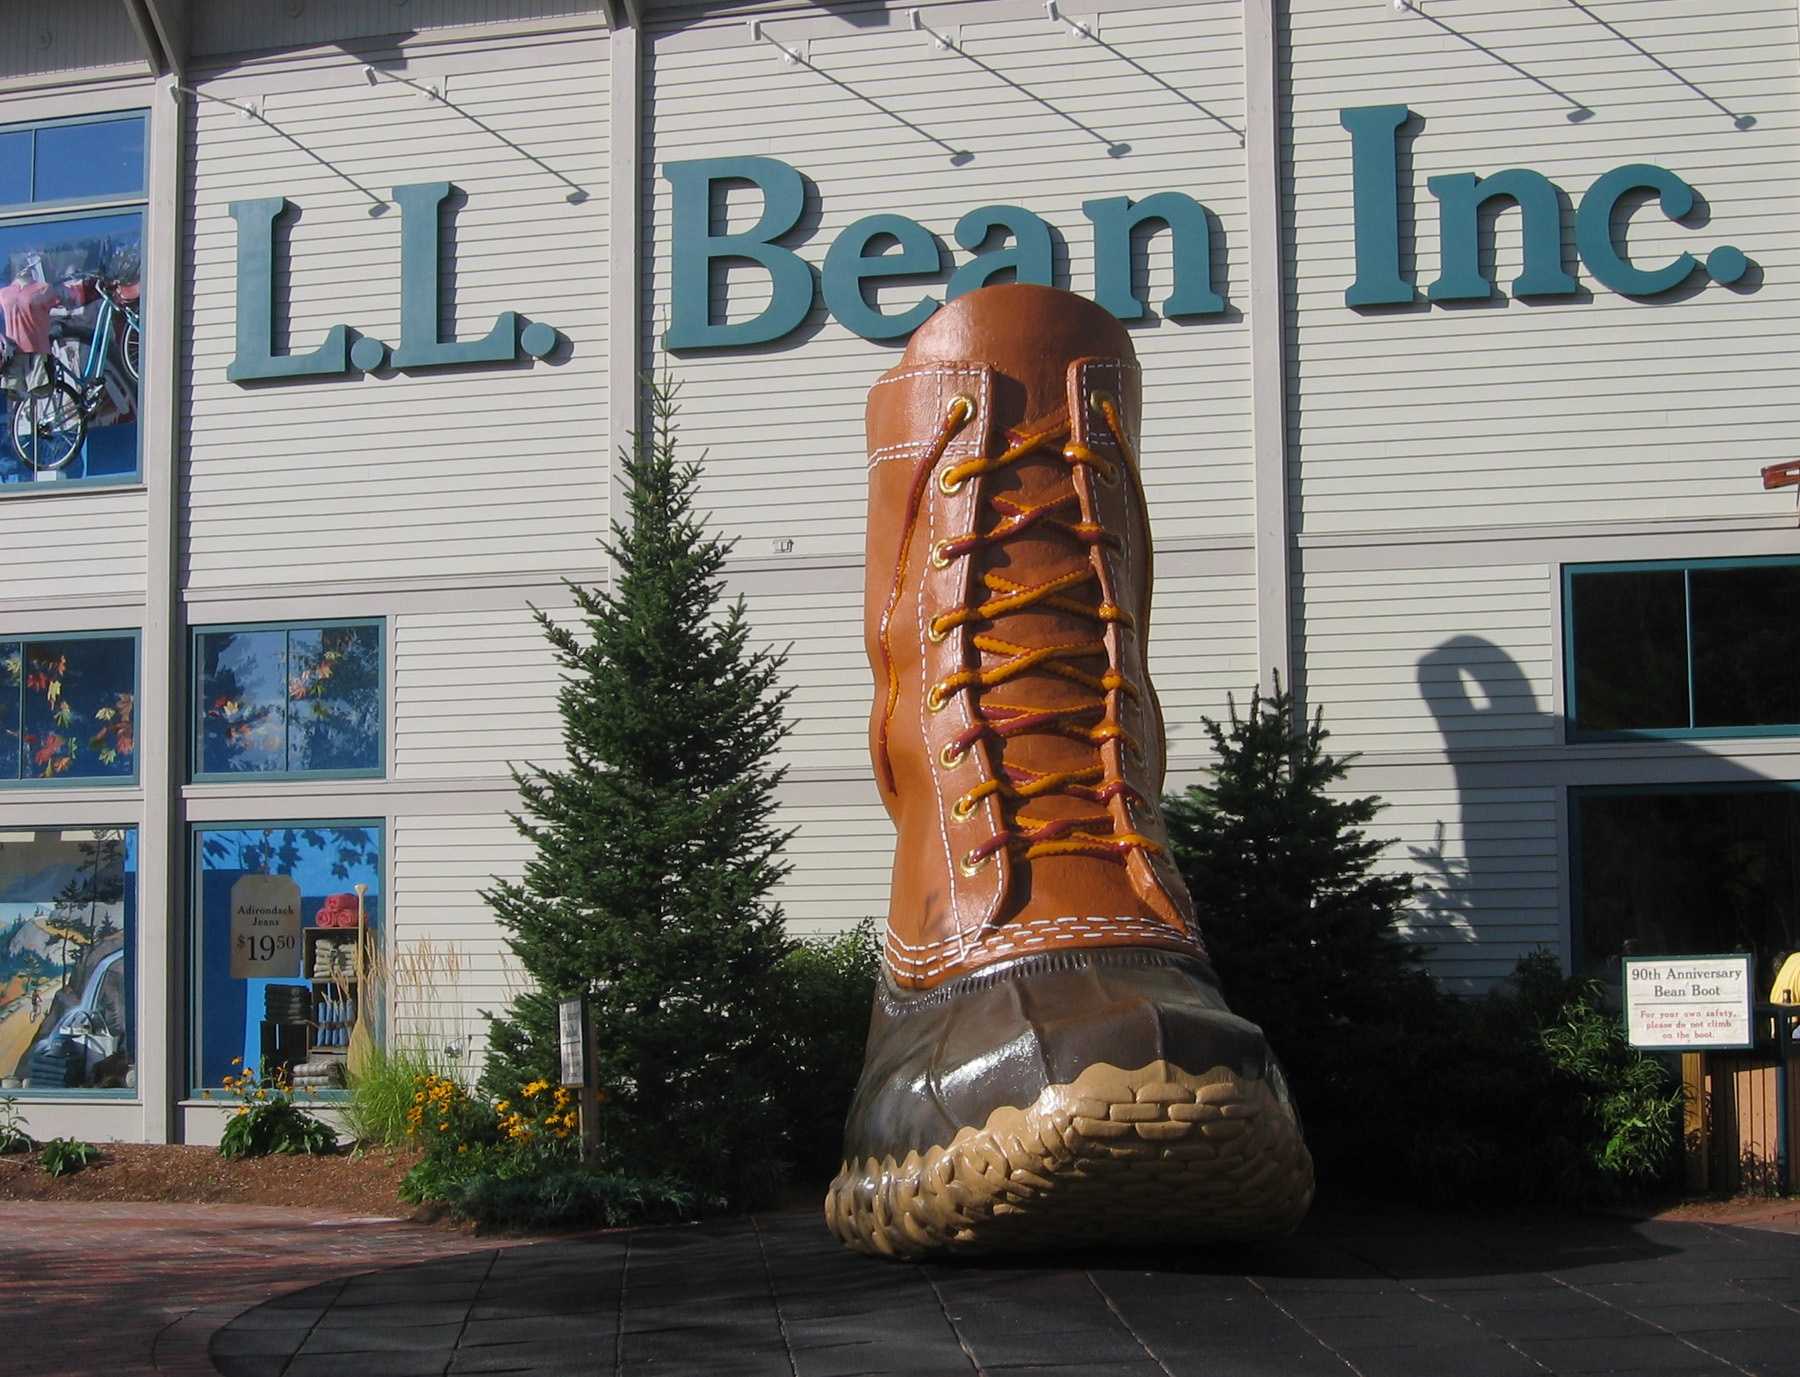 ll bean outlet store closing